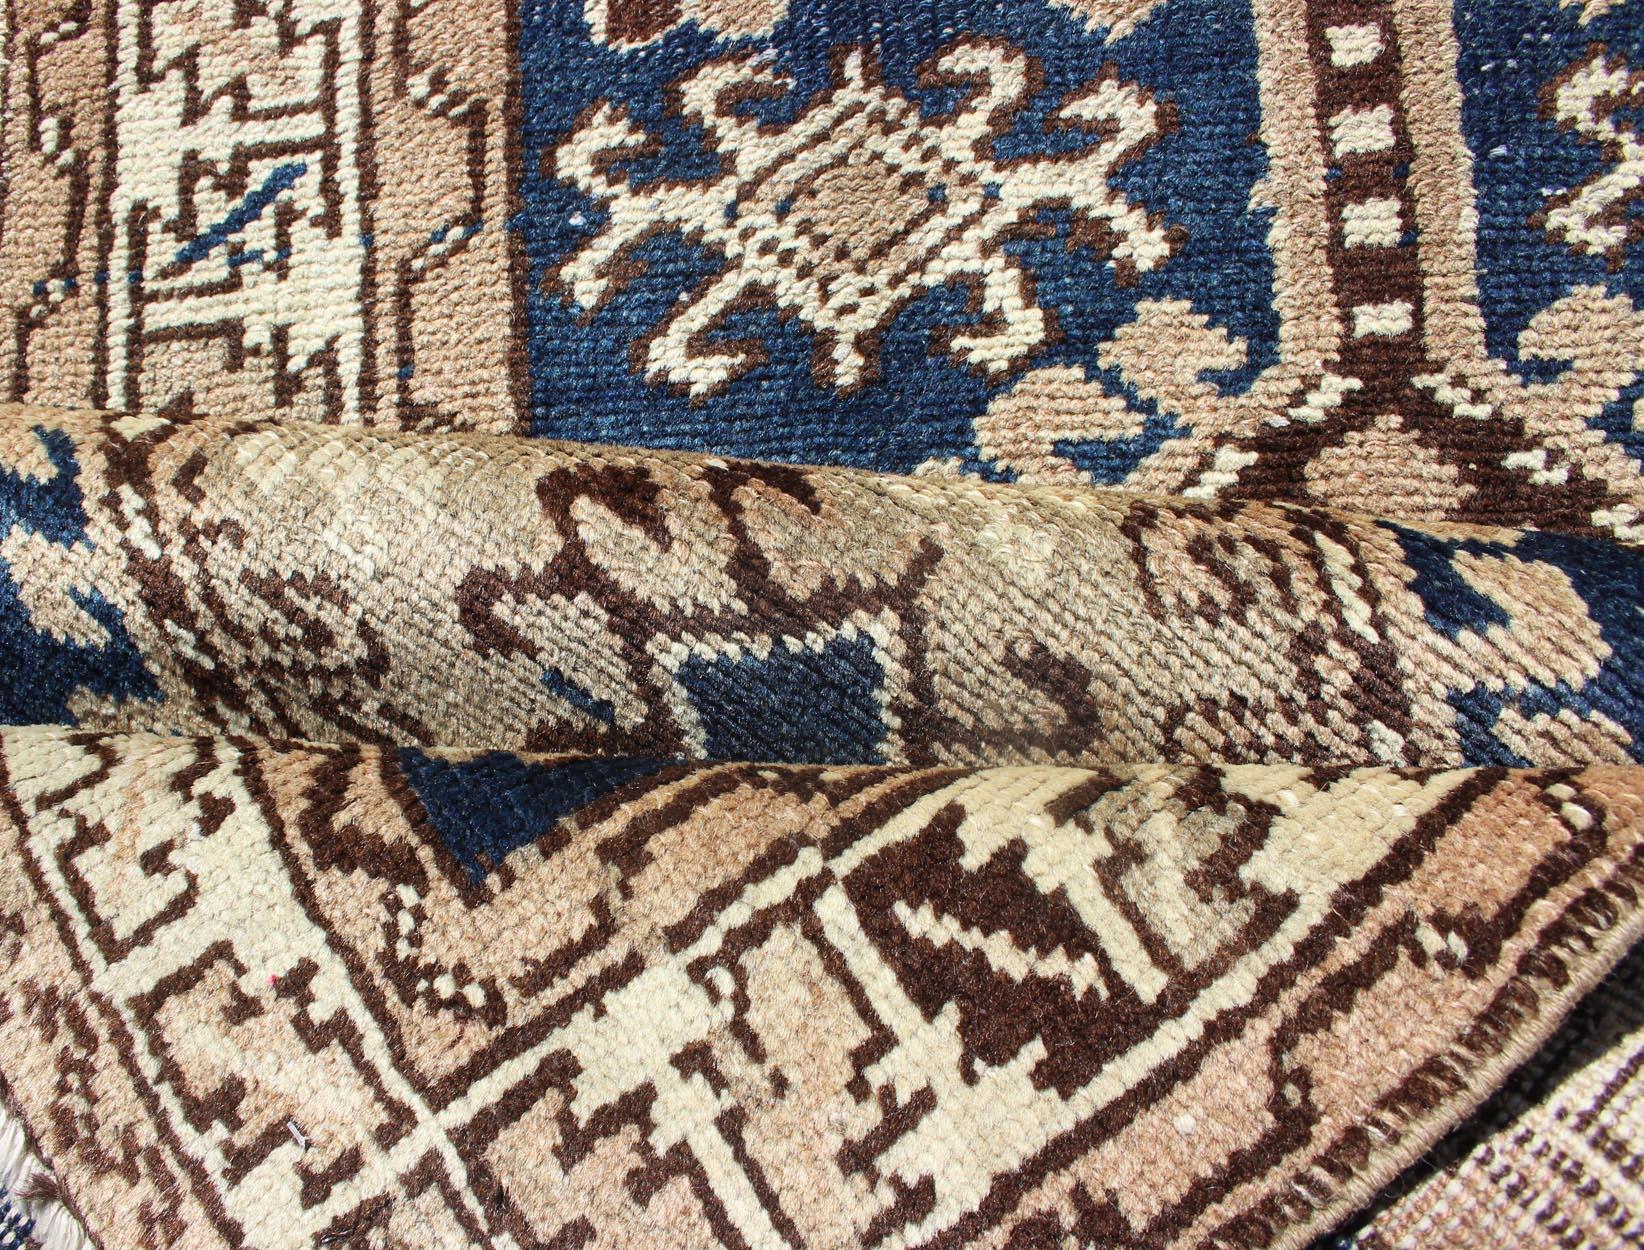 Antique Blue Tribal Karajeh Runner With Navy Blue, Brown and Earth Tones For Sale 2